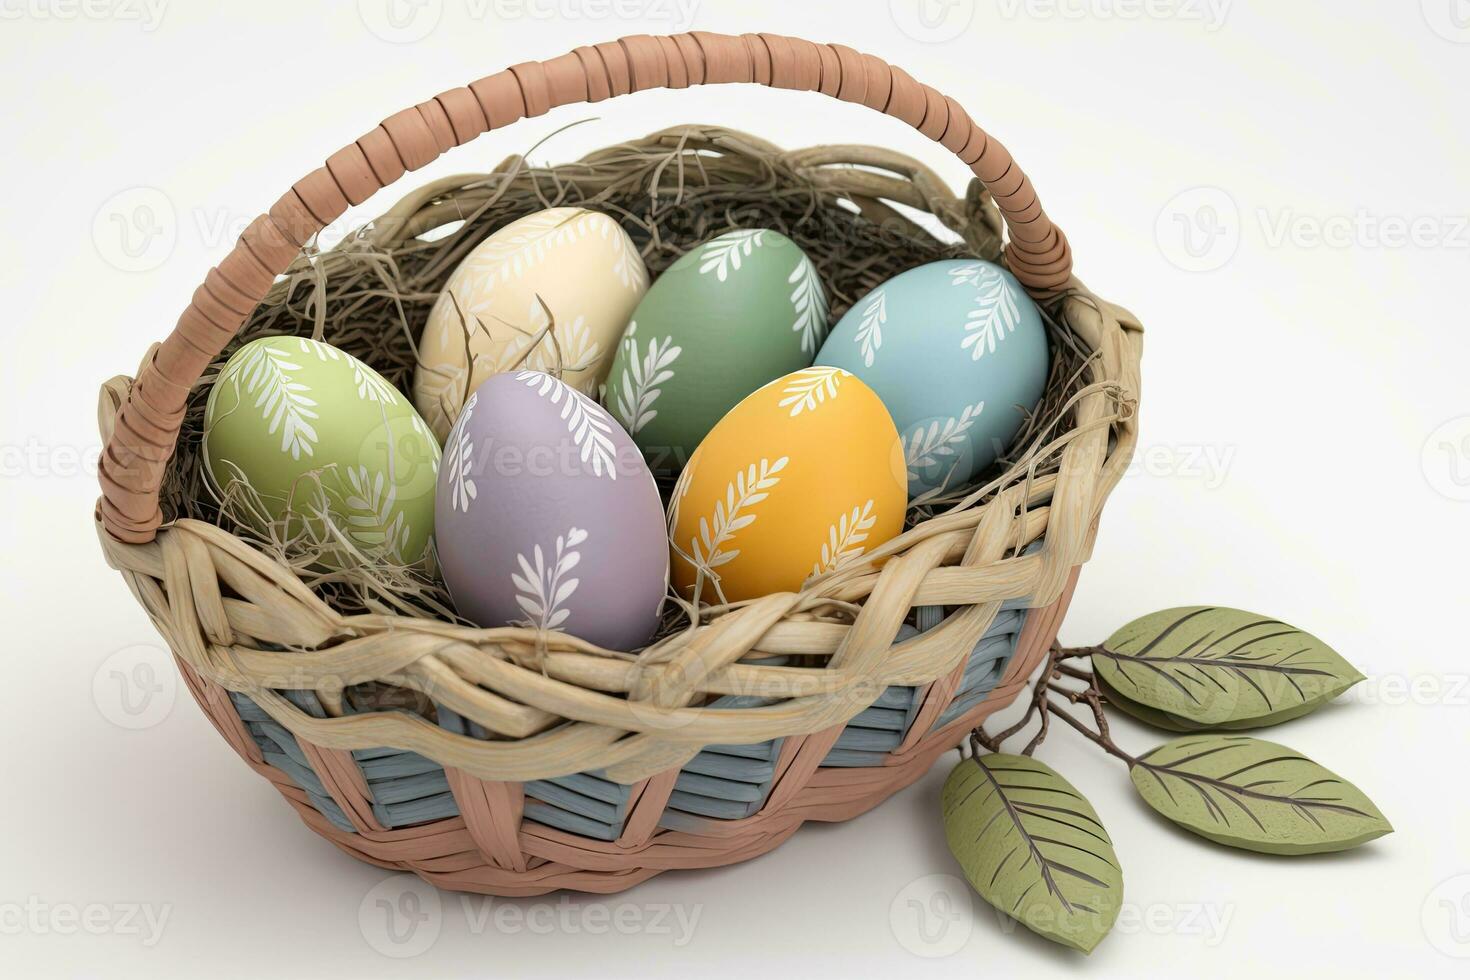 festive Easter basket filled with colorful eggs on a tabletop photo